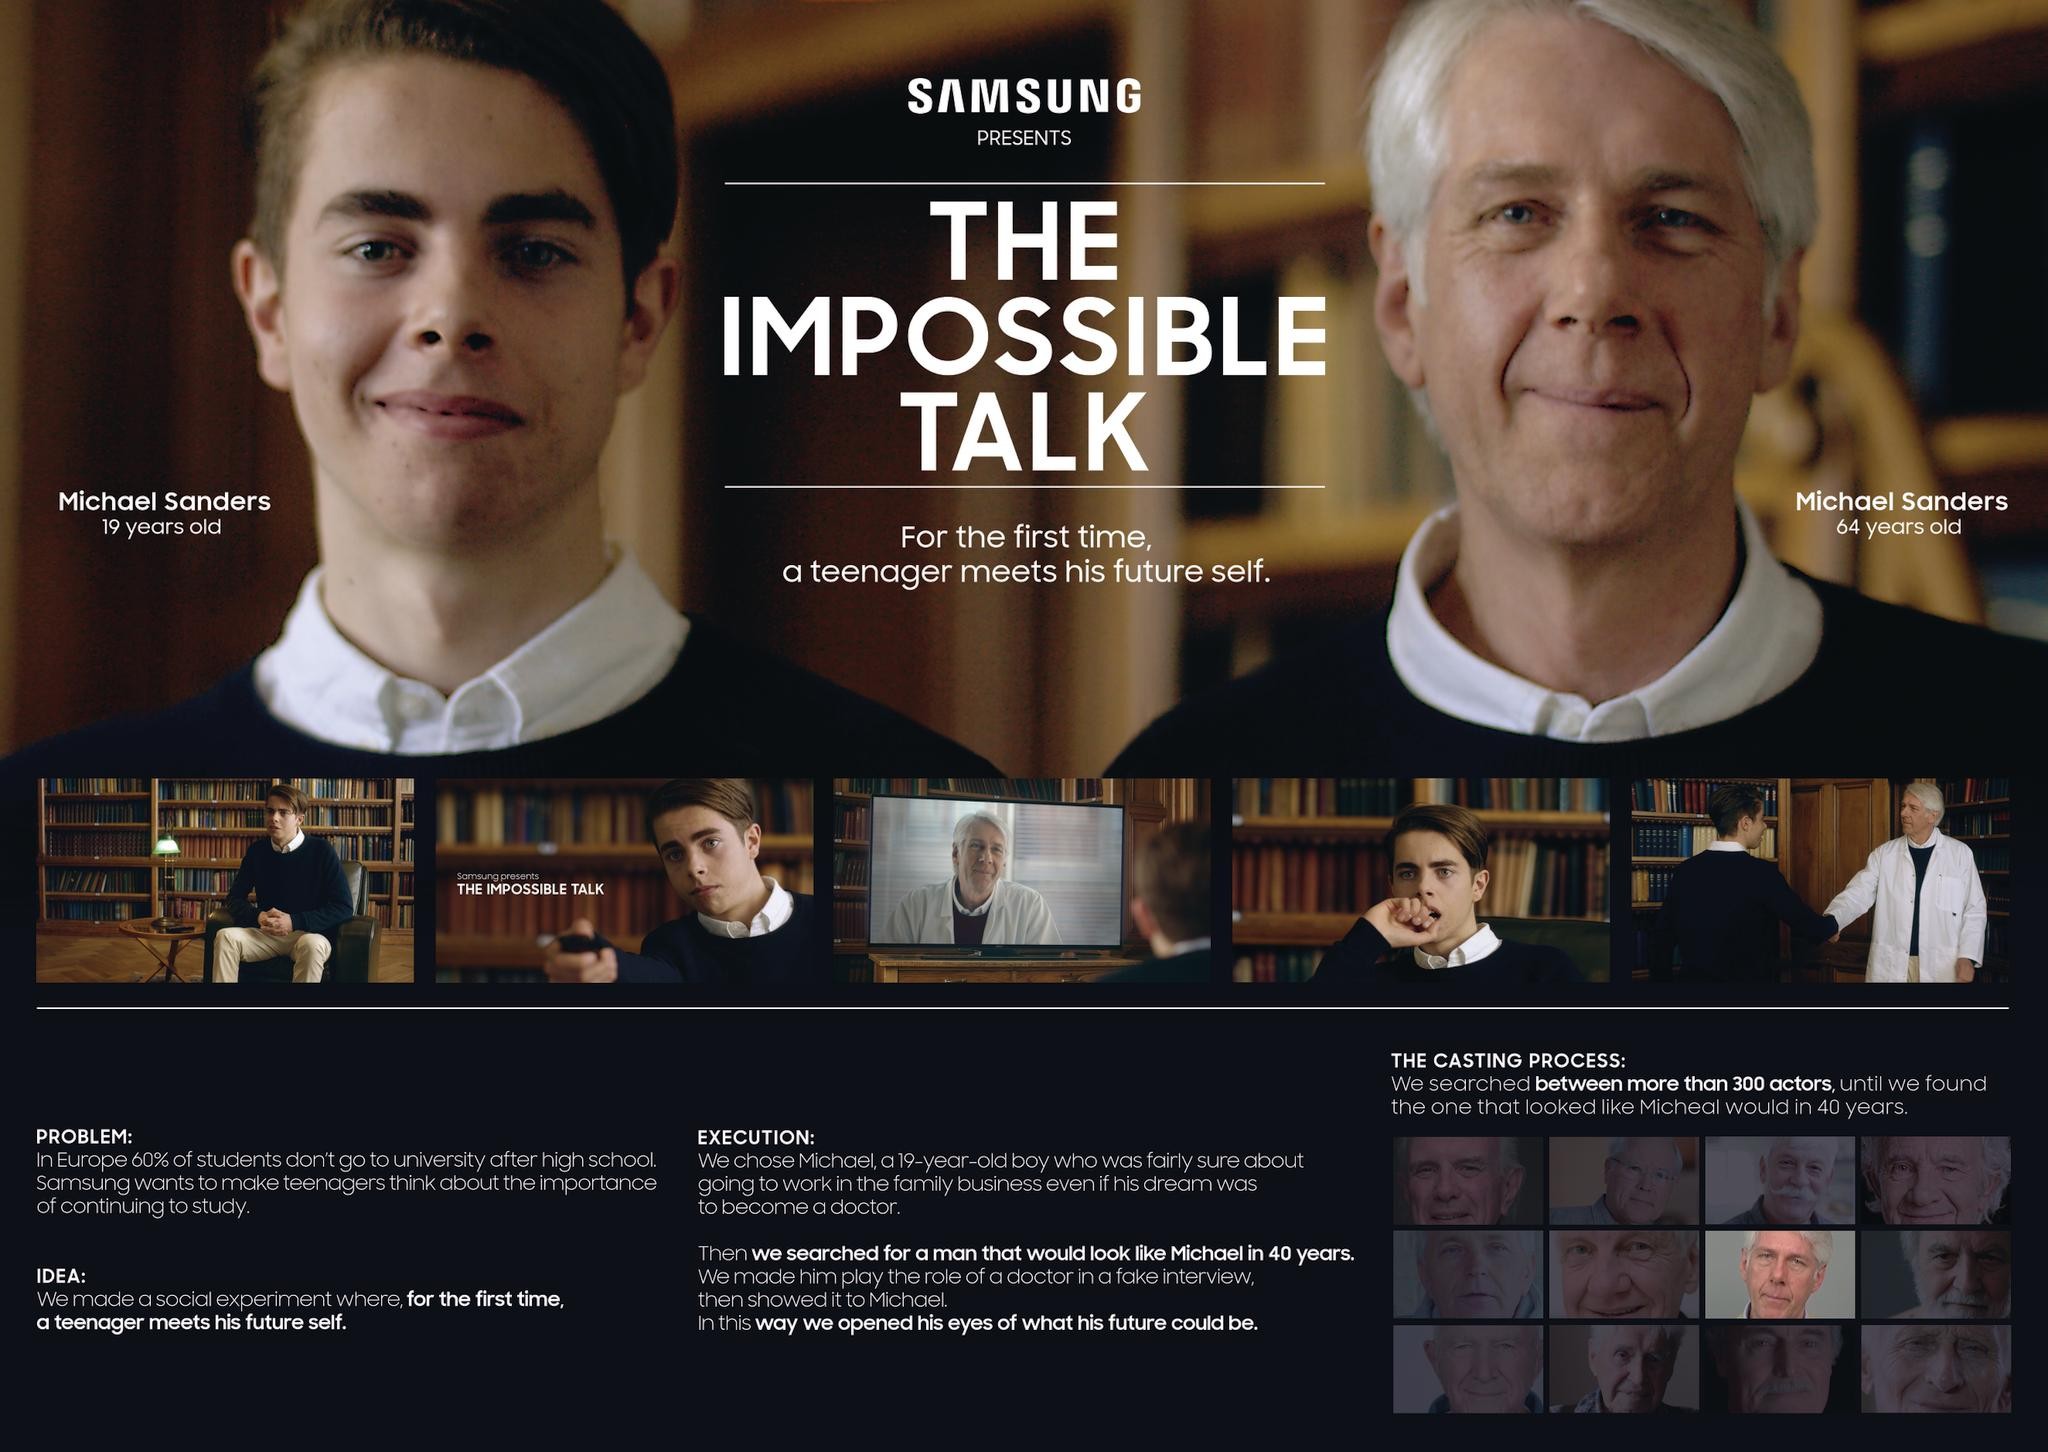 Samsung - The Impossible Talk